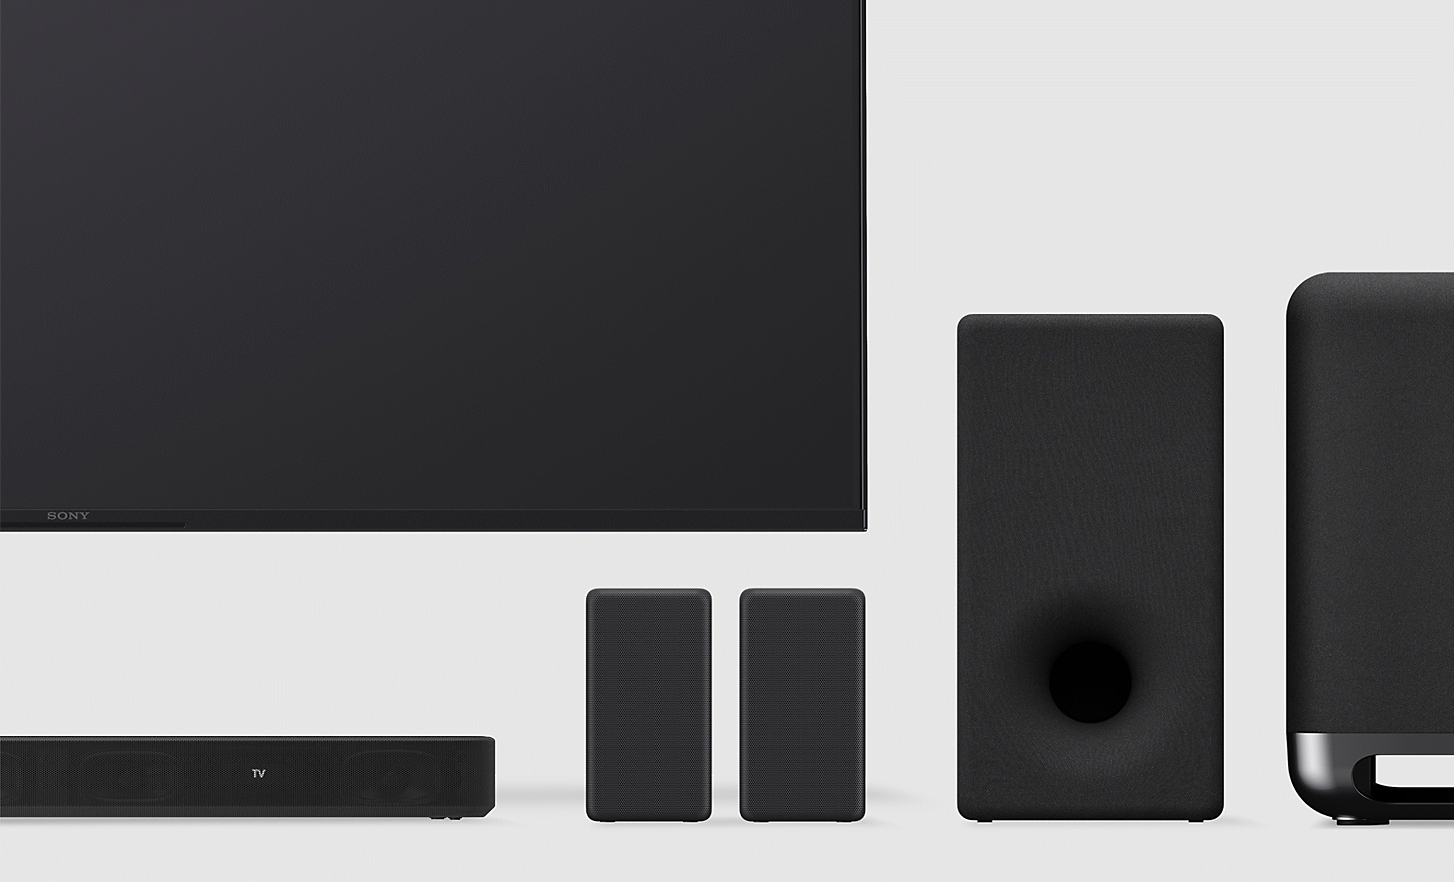 Image of various Sony products including a TV, speakers, subwoofer and sound bar